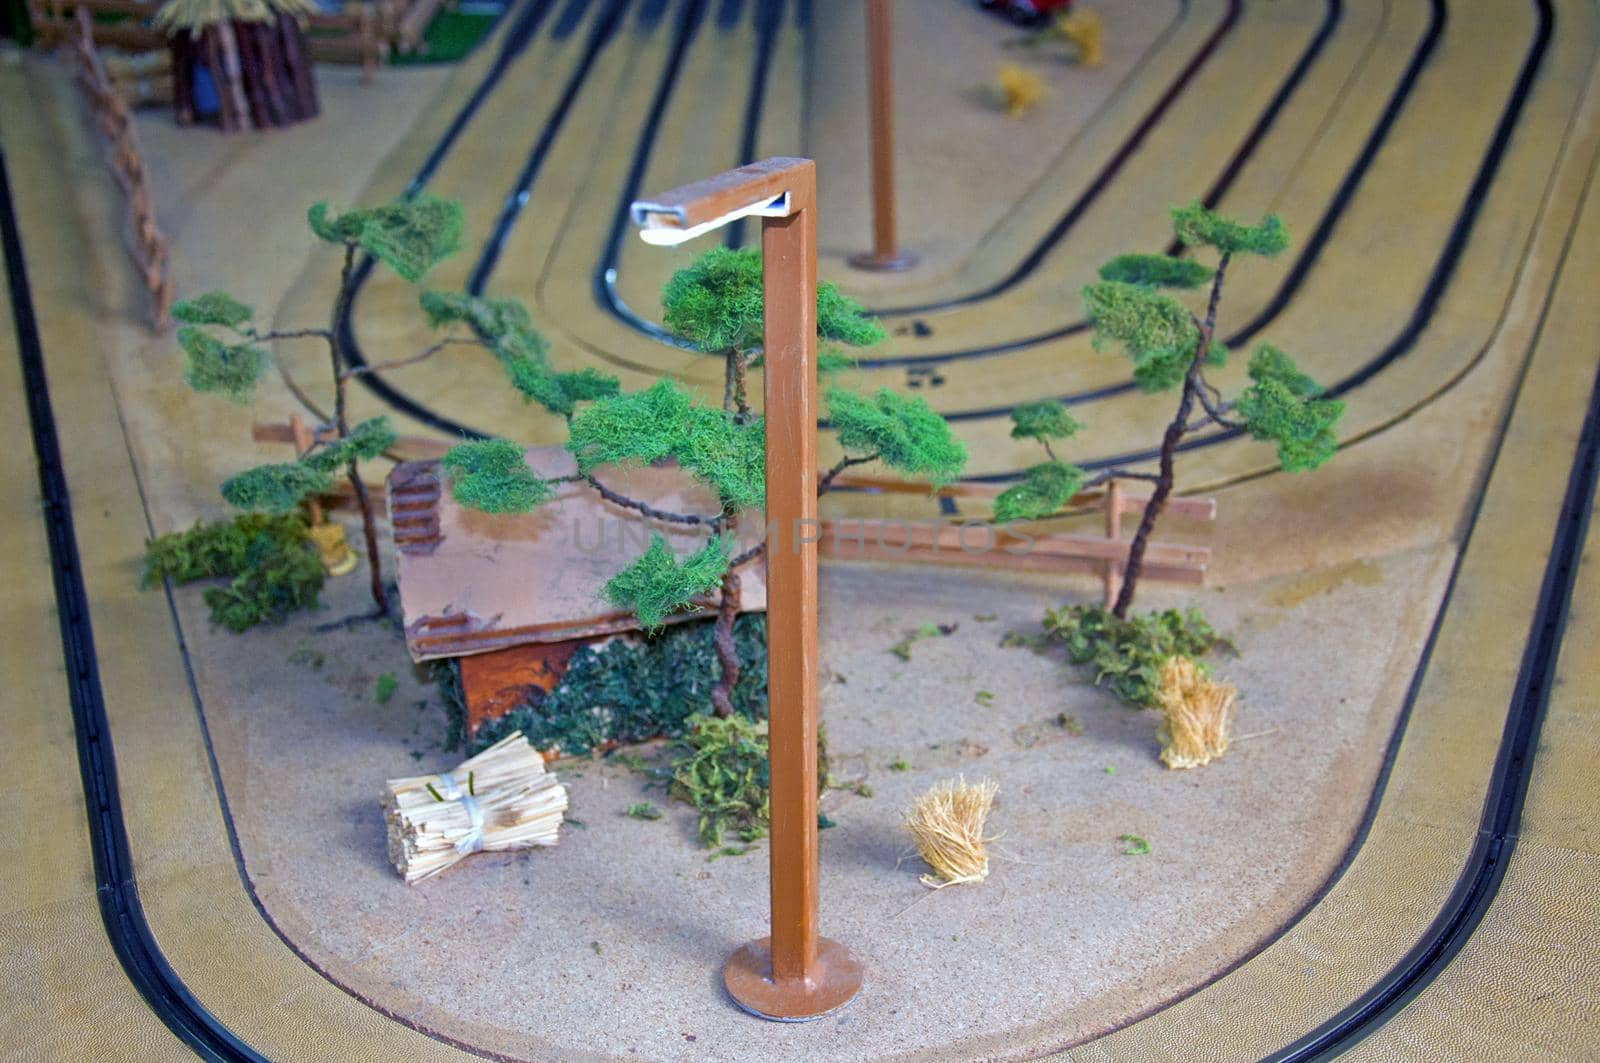 Small toy house, trees and lantern in toy track, front up view